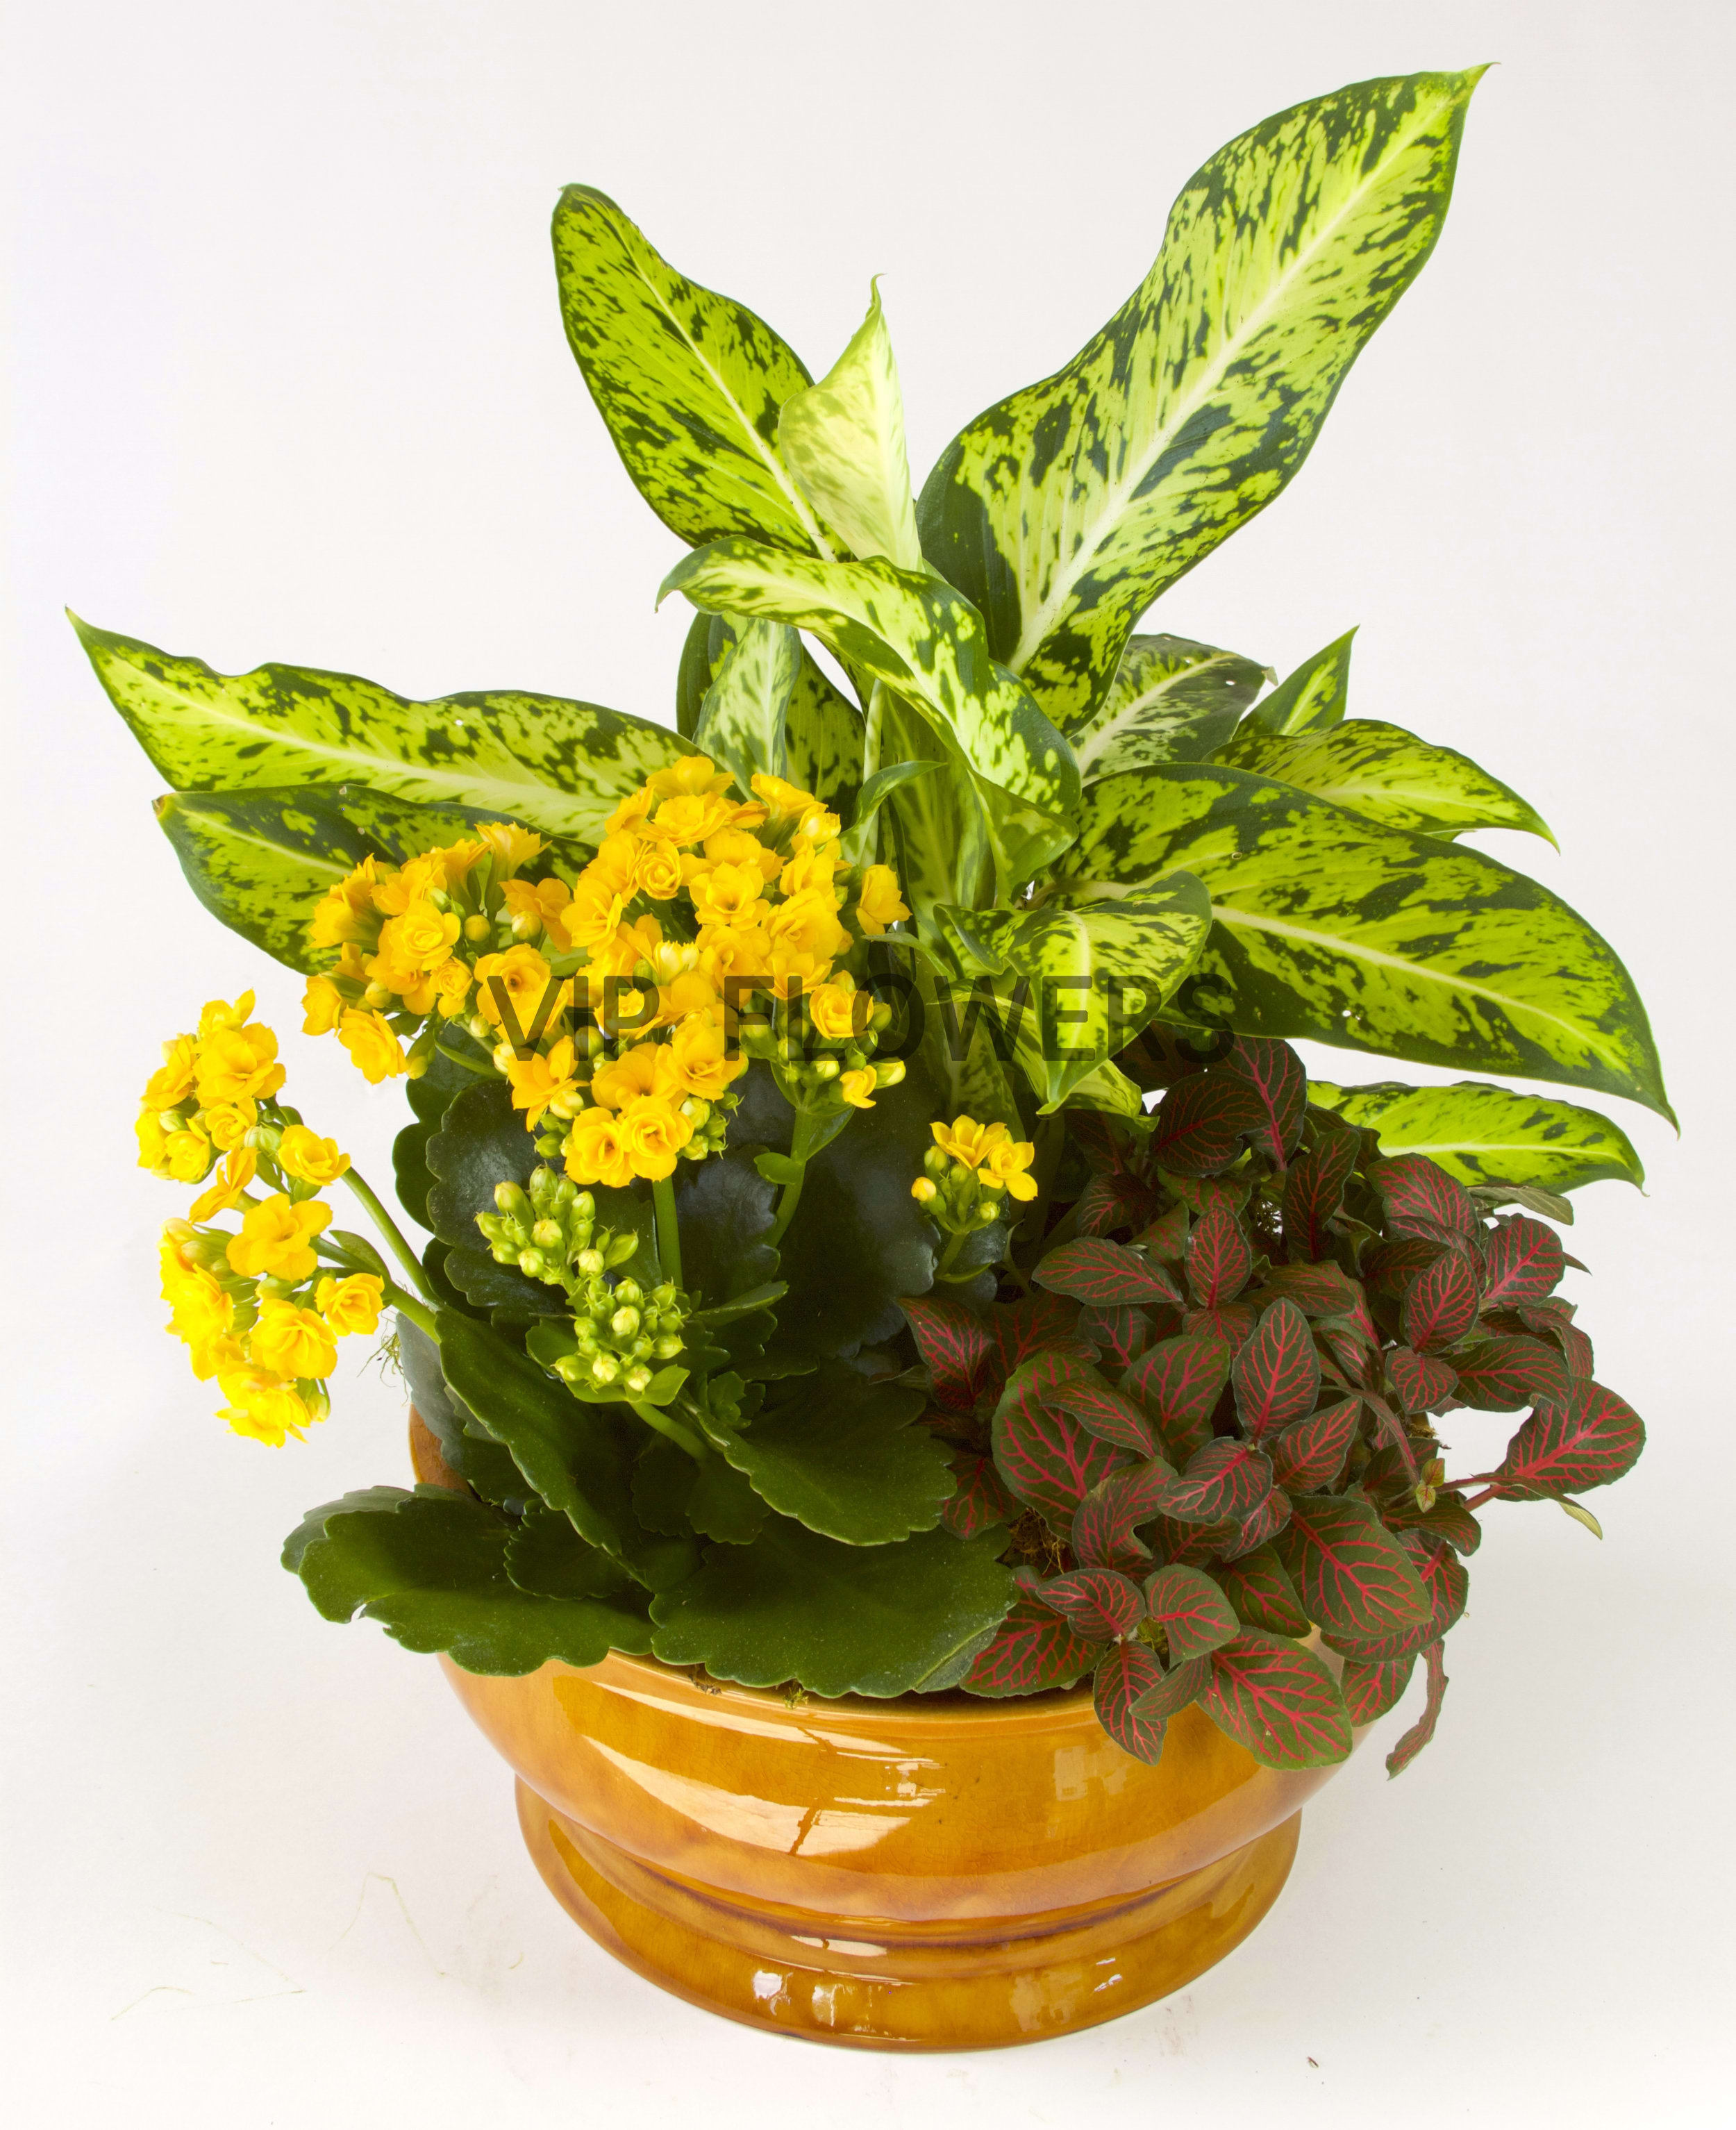 Designer Choice Plant - Substitutions may be necessary to ensure your arrangement or specialty gift is delivered in a timely manner. The utmost care and attention is given to your order to ensure that it is as similar as possible to the requested item (Please note that some flowers and colors may vary due to seasonality.)